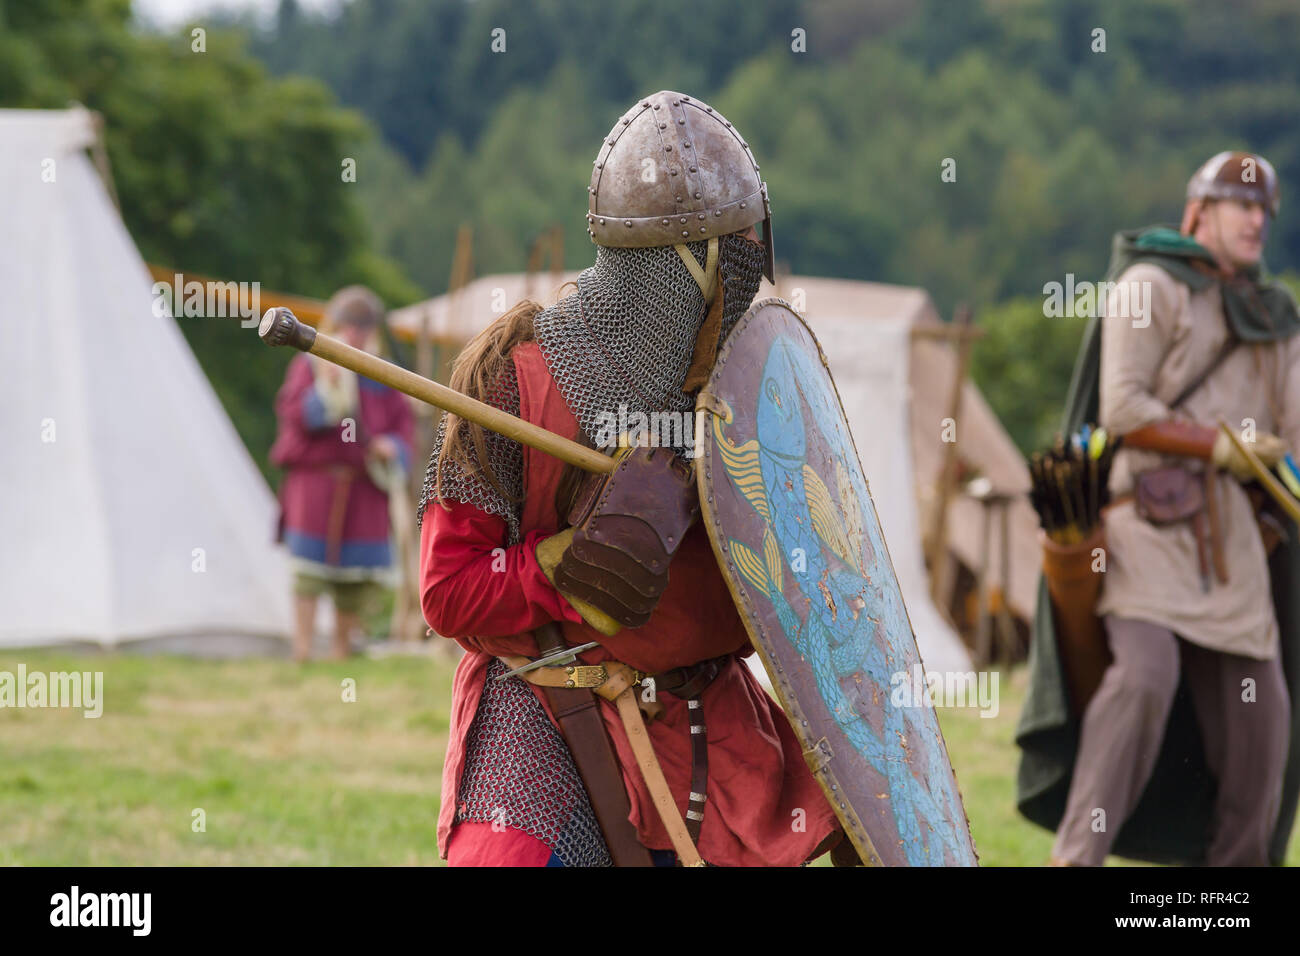 Medieval battle re-enactment with men wearing a spangenhelm helmet and chain mail aventail or camail to protect the neck with a mace Stock Photo